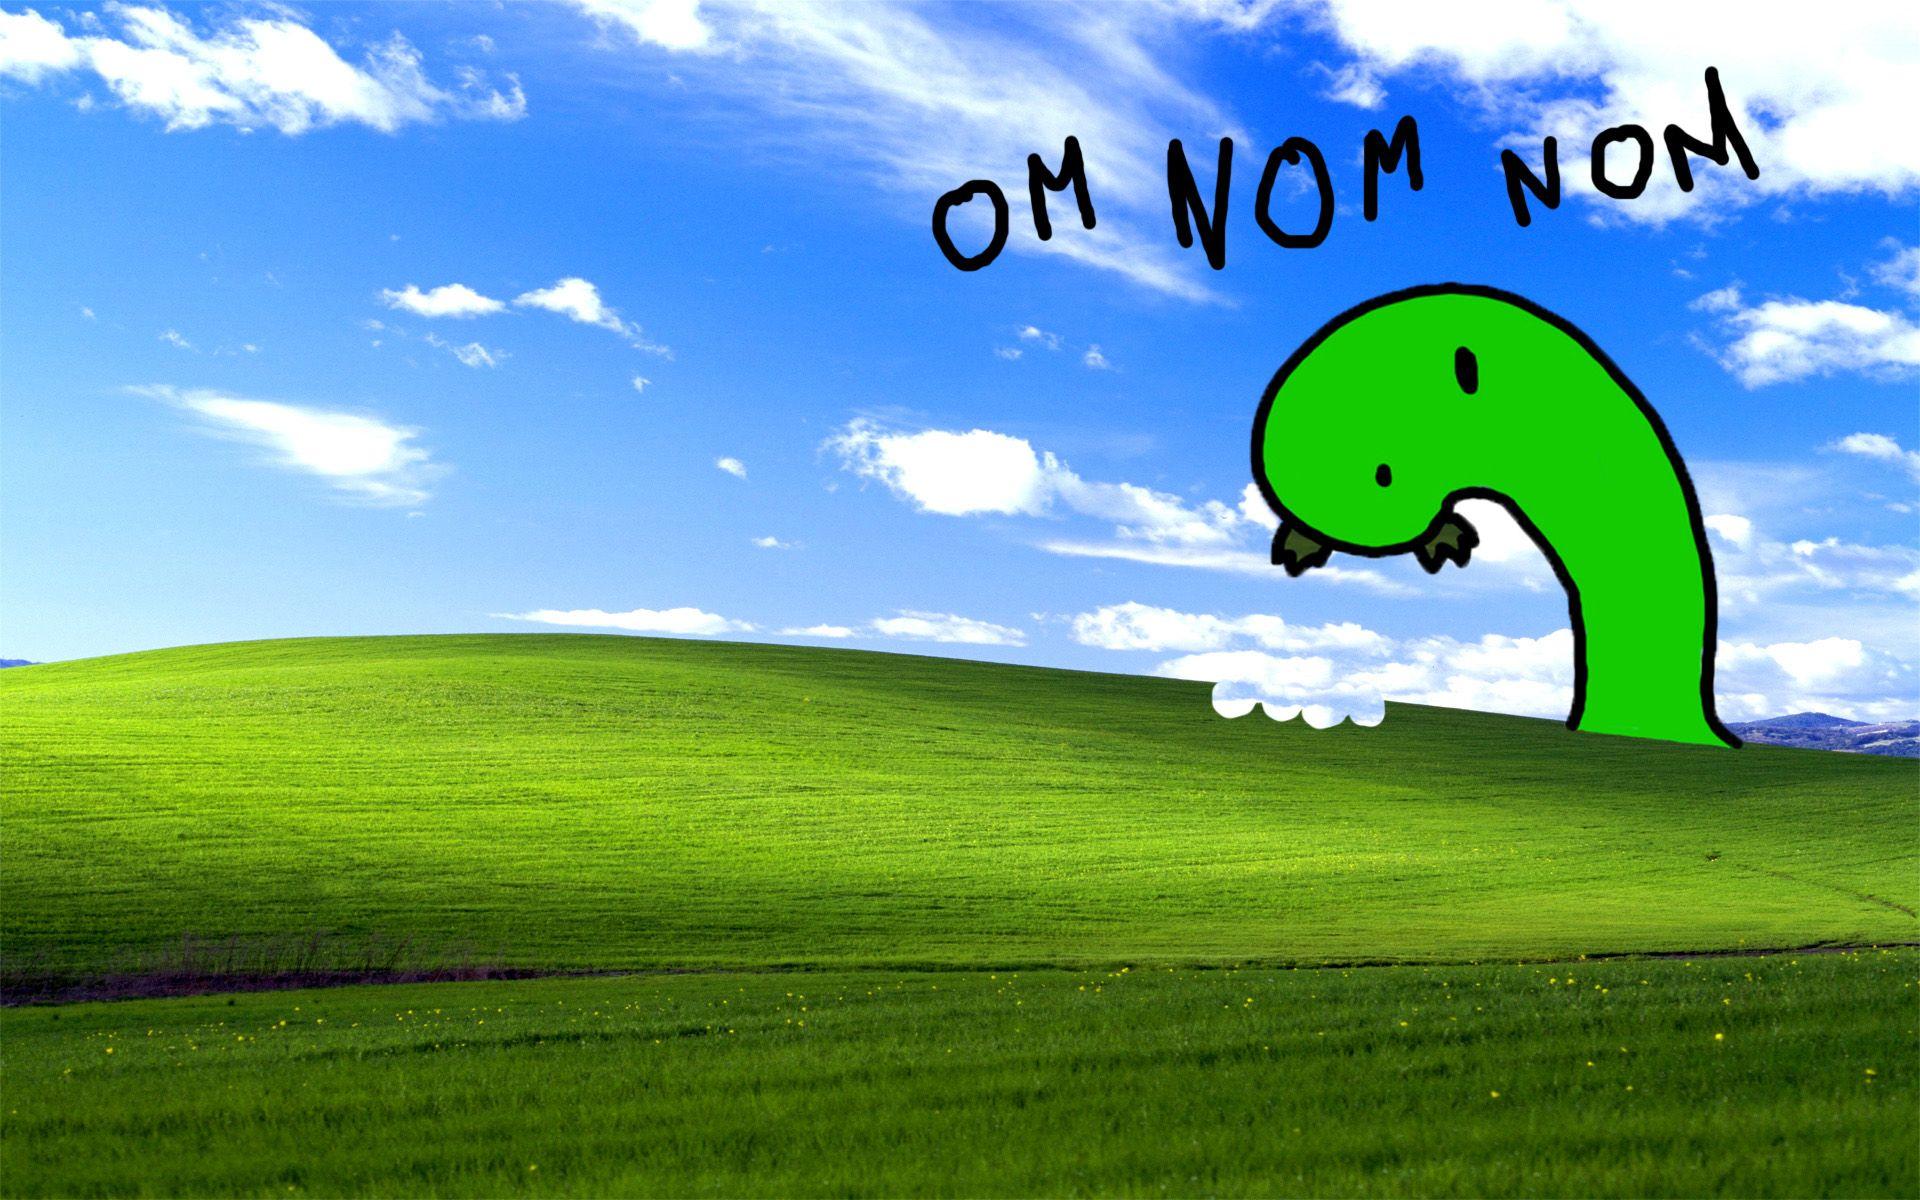 Funny Bliss Windows Xp Wallpapers.